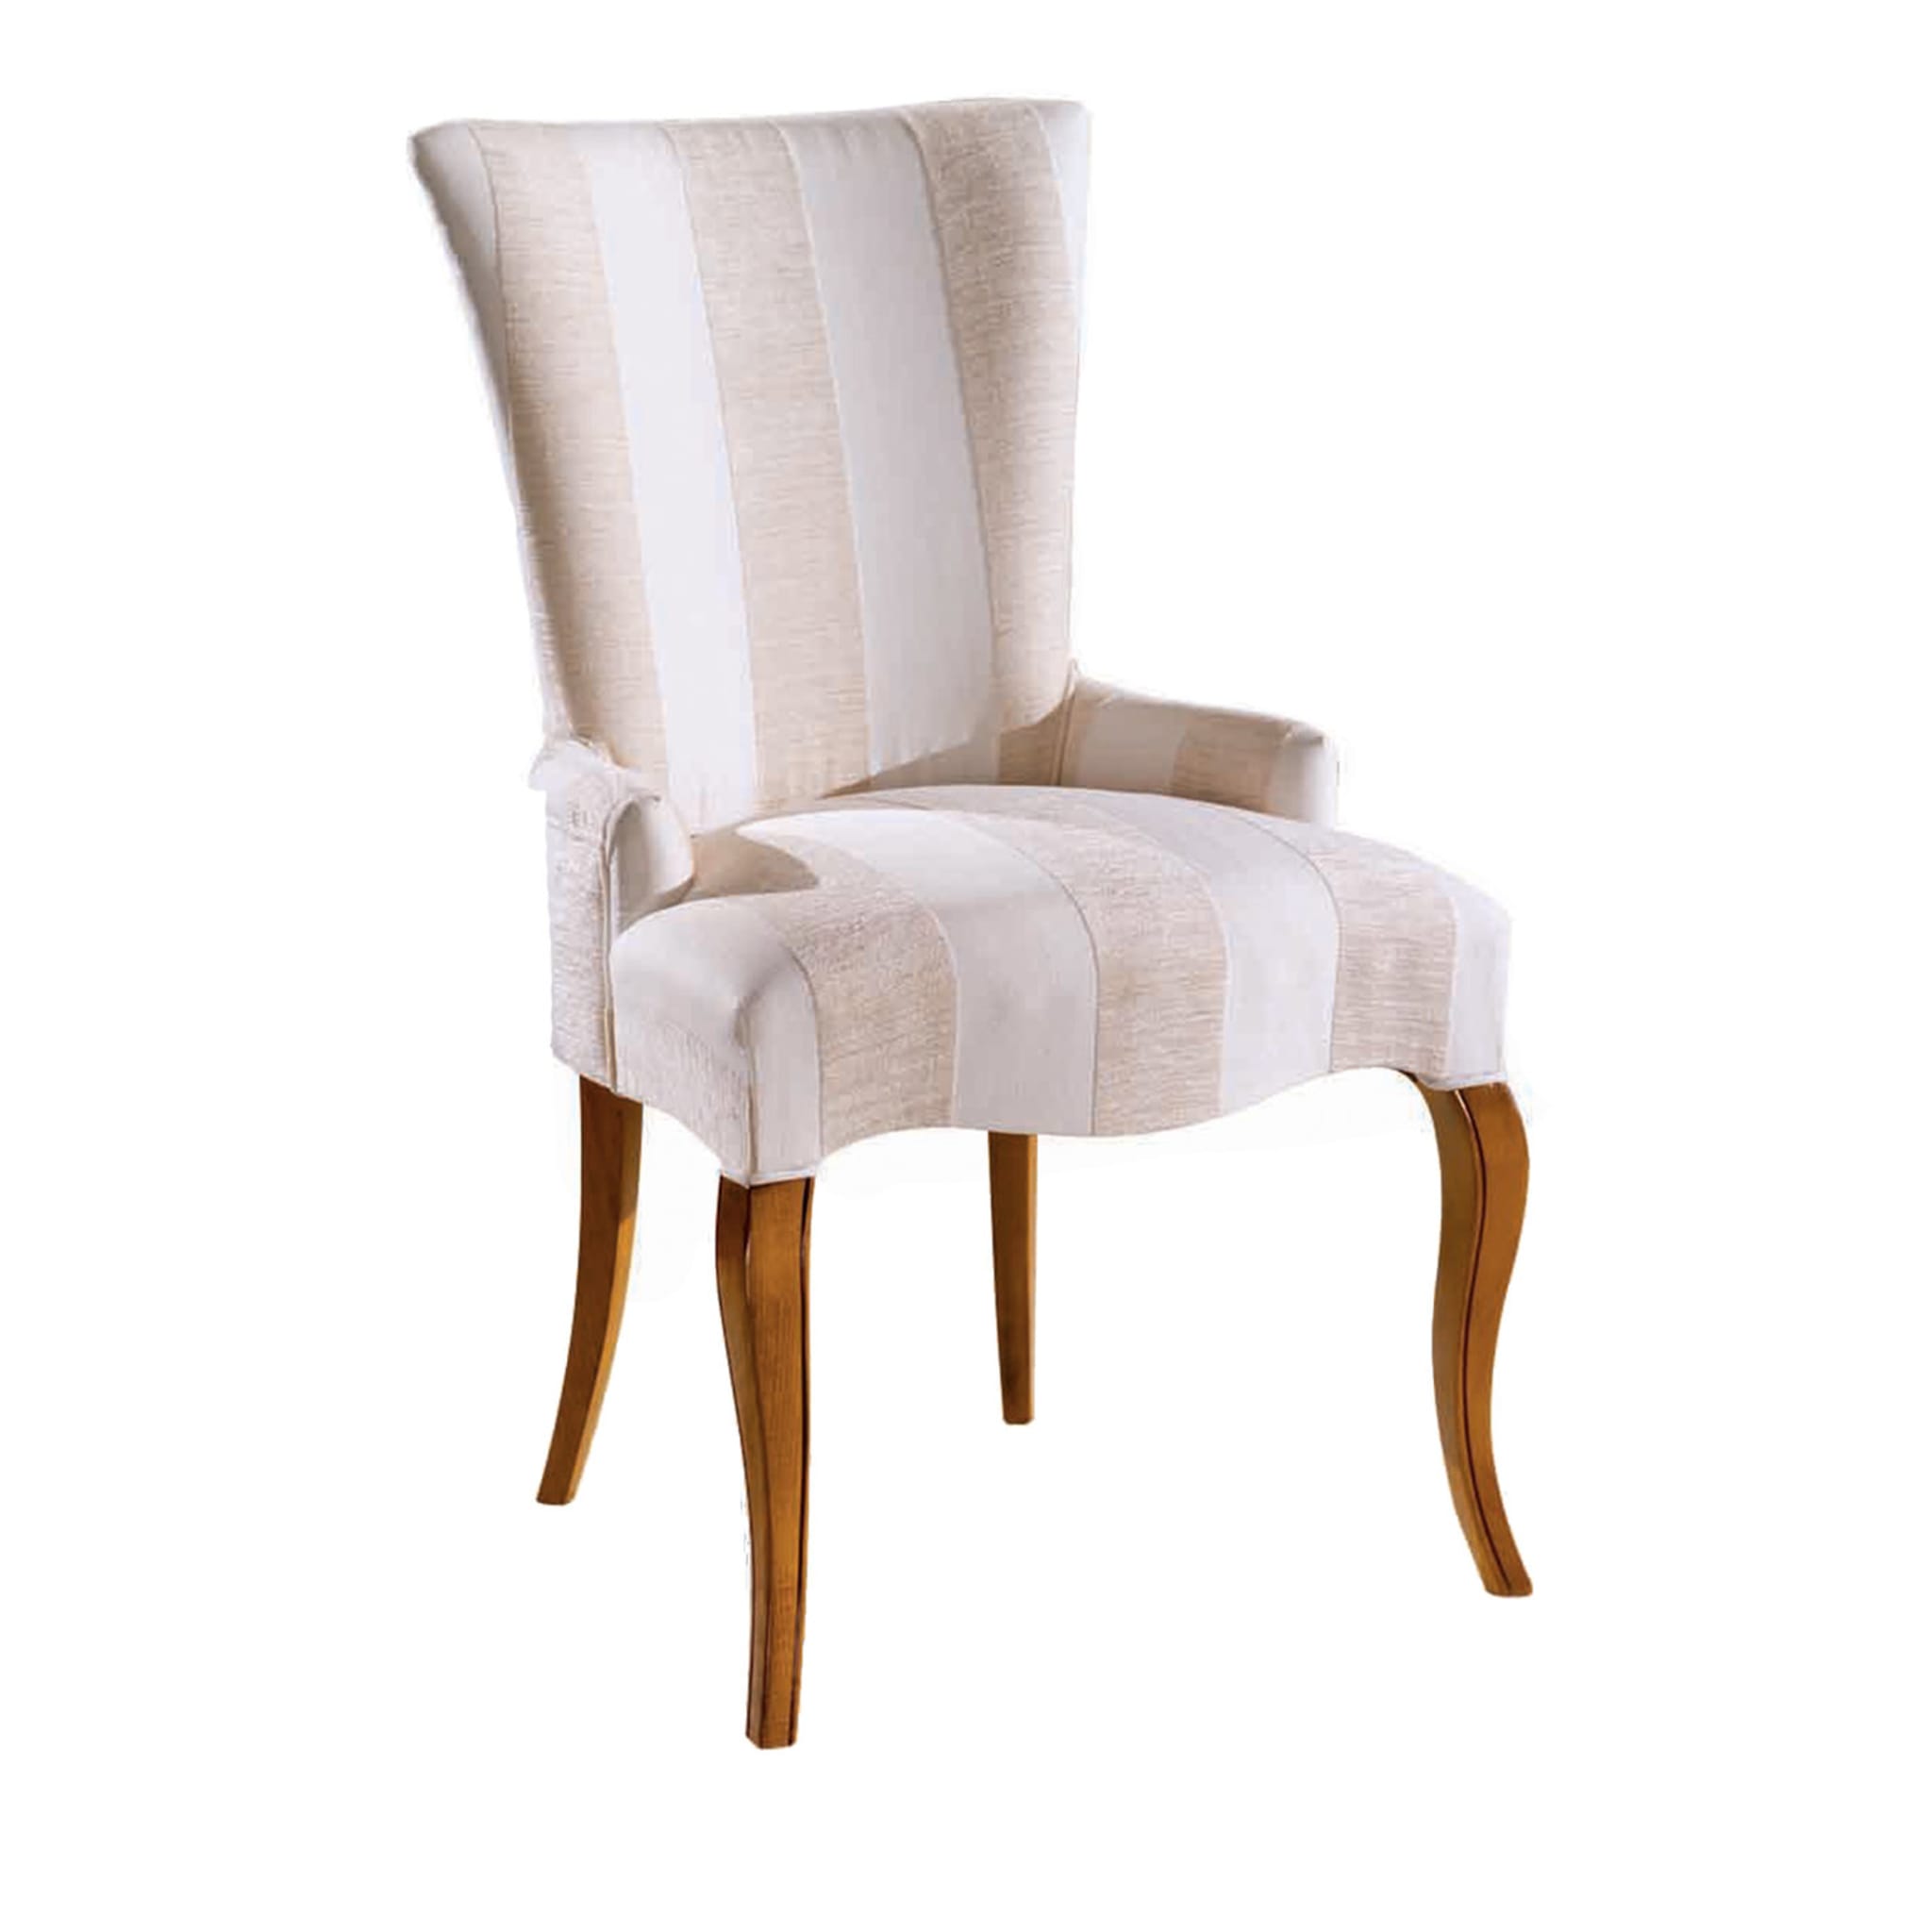 White and Pink Upholstered Chair - Main view